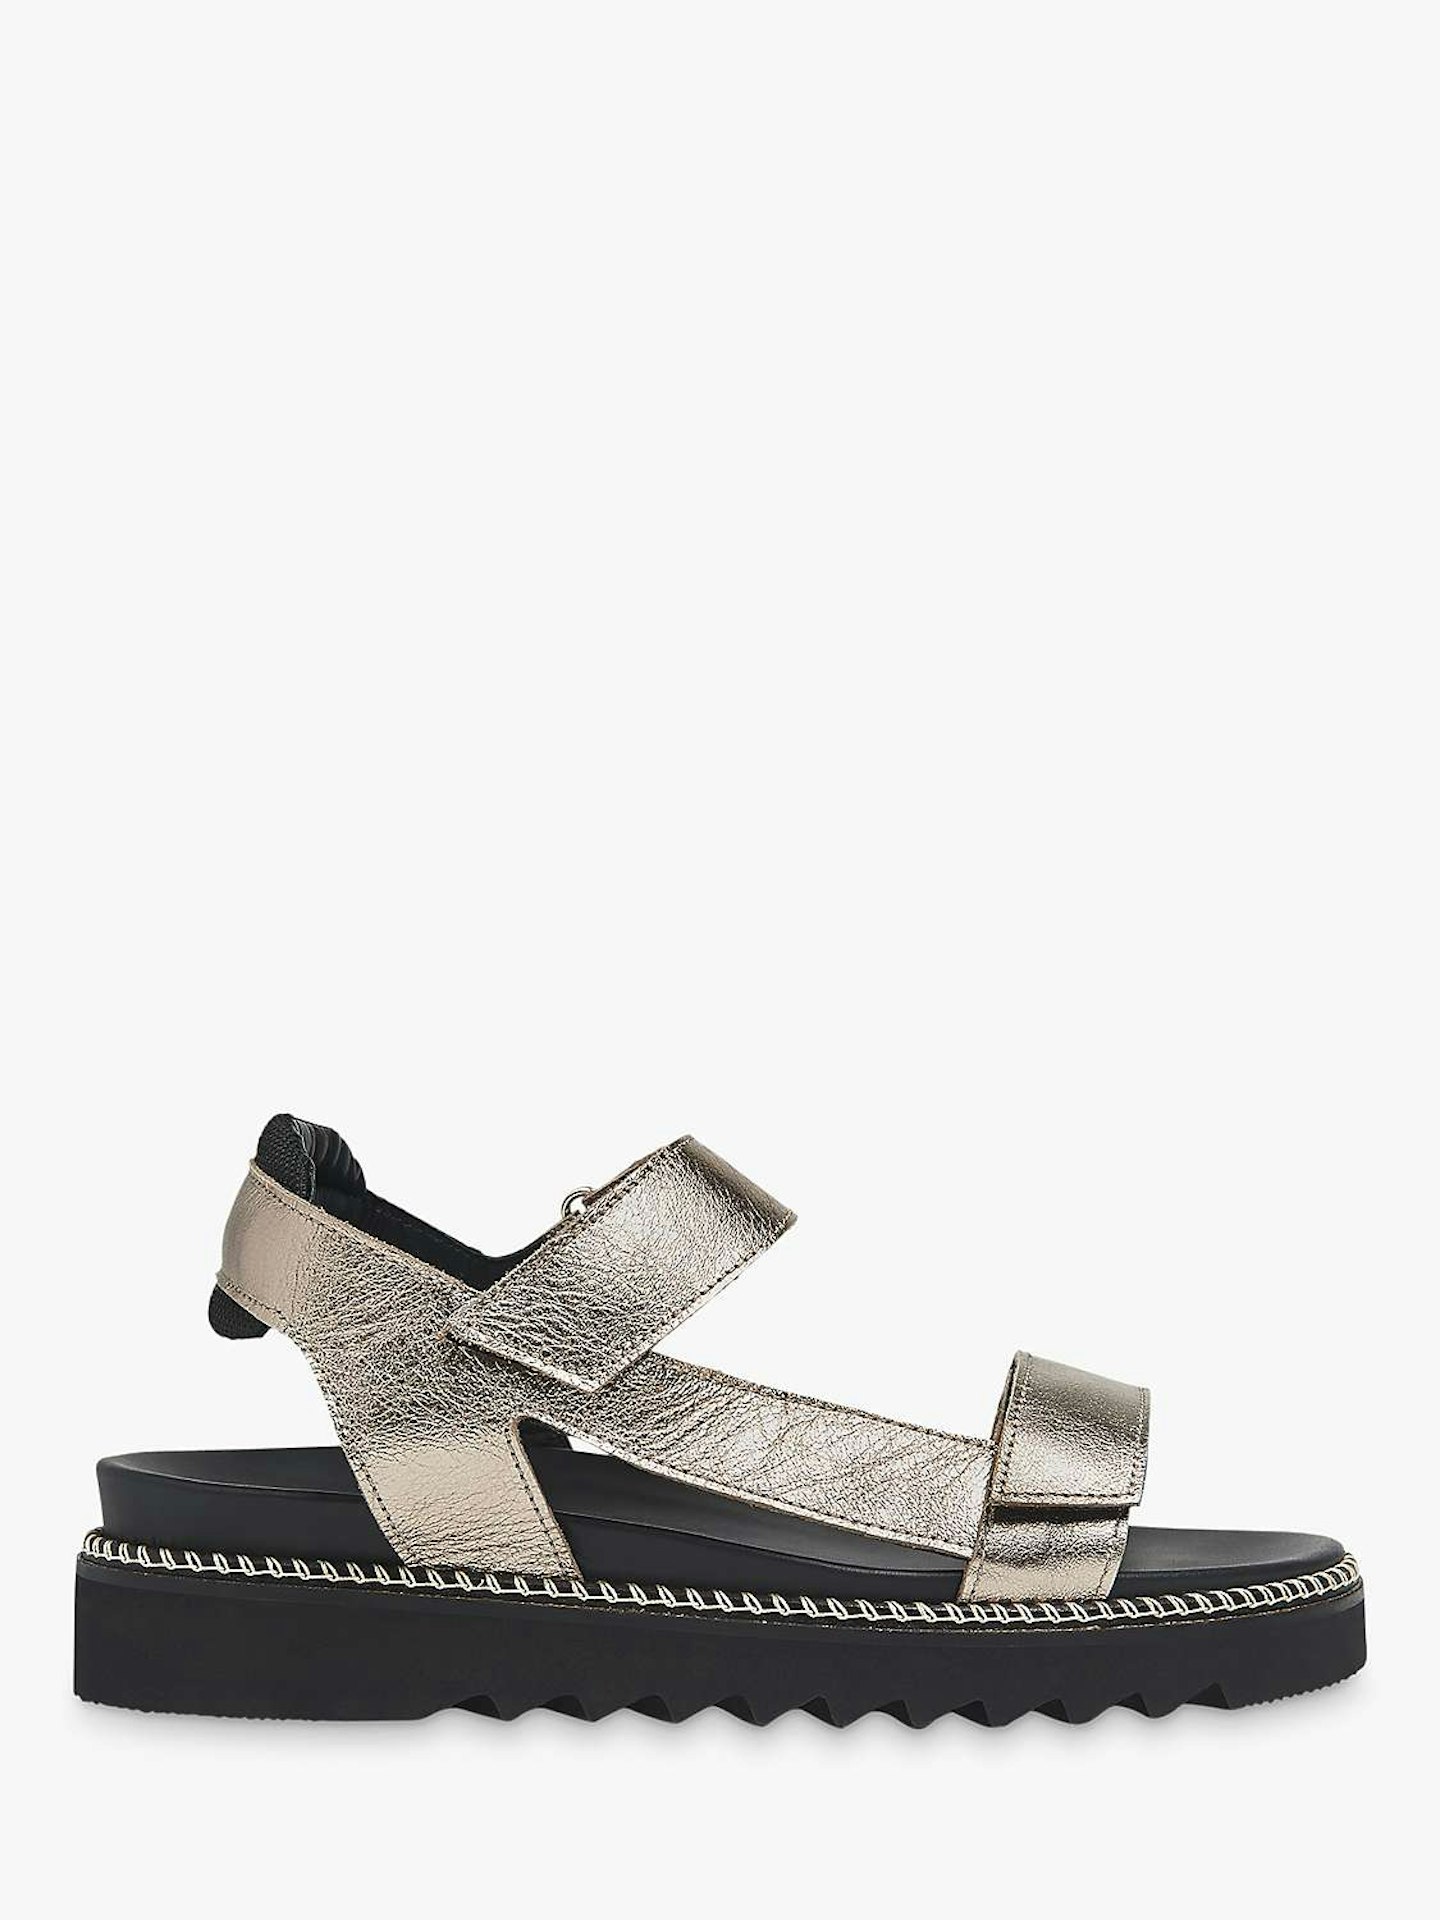 Whistles at John Lewis, Leather Sandals, £135.20